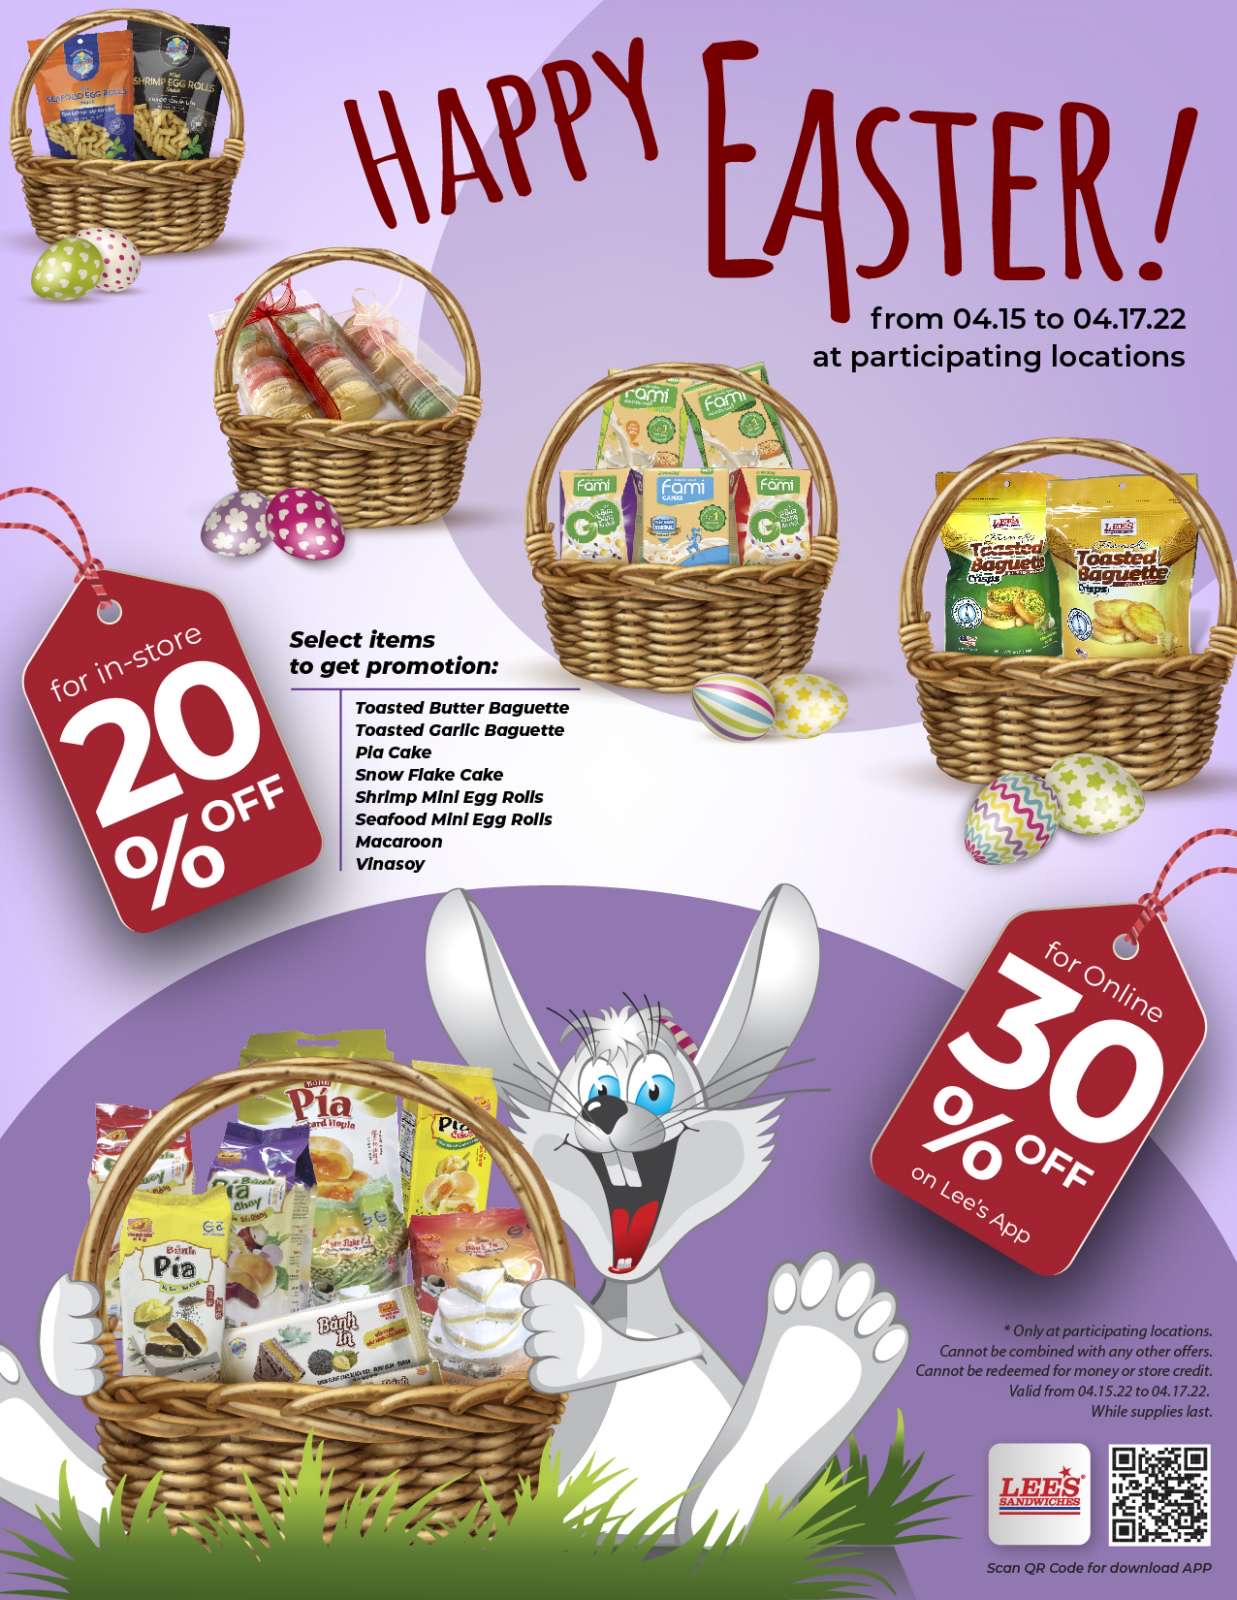 Happy Easter 20% OFF in stores or 30% OFF online orders, selected items, only 4/15 - 4/17/22, at participating locations!